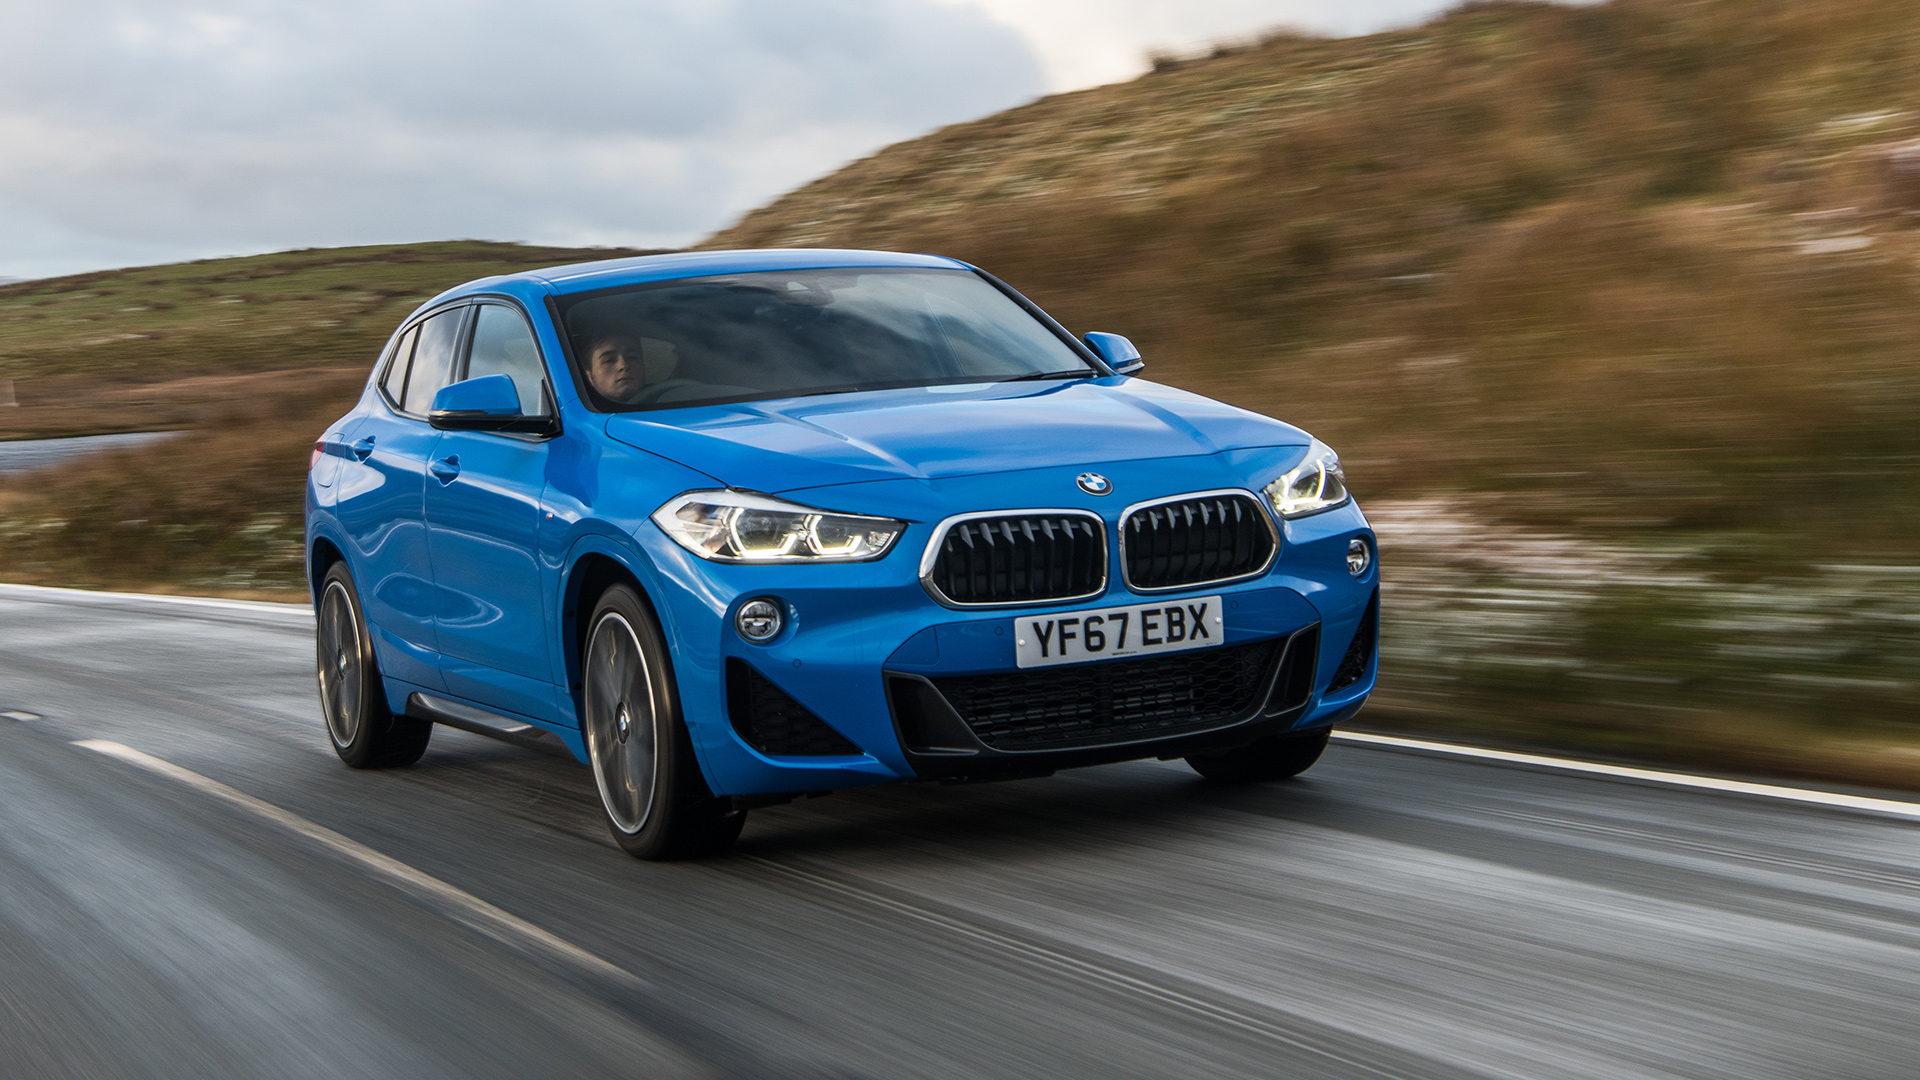 Bmw X2 Suv 2017 Review Auto Trader Uk